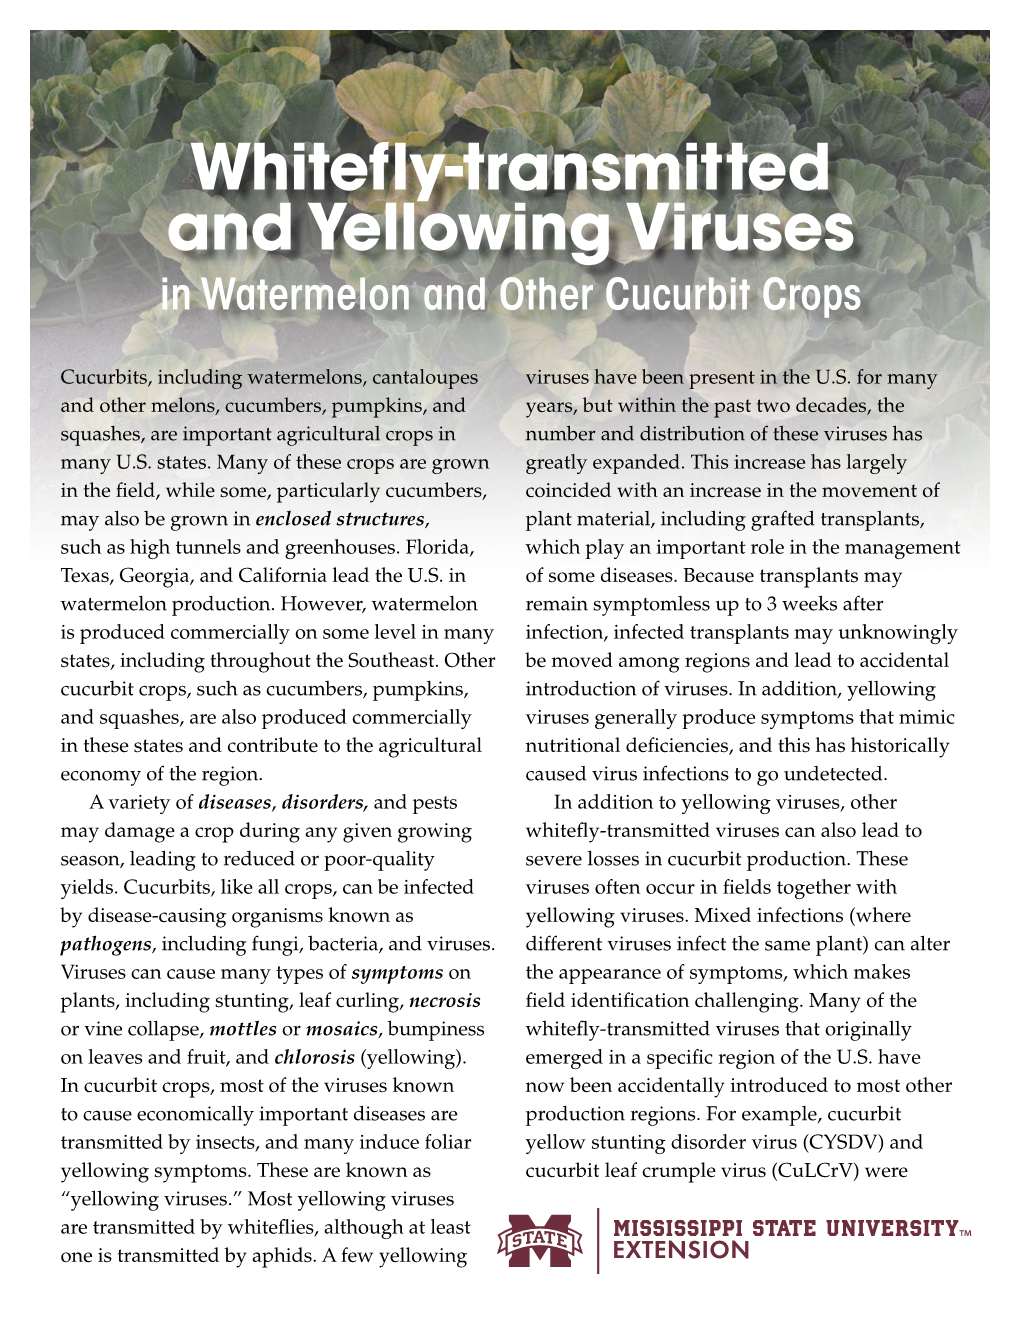 Whitefly-Transmitted and Yellowing Viruses in Watermelon and Other Cucurbit Crops